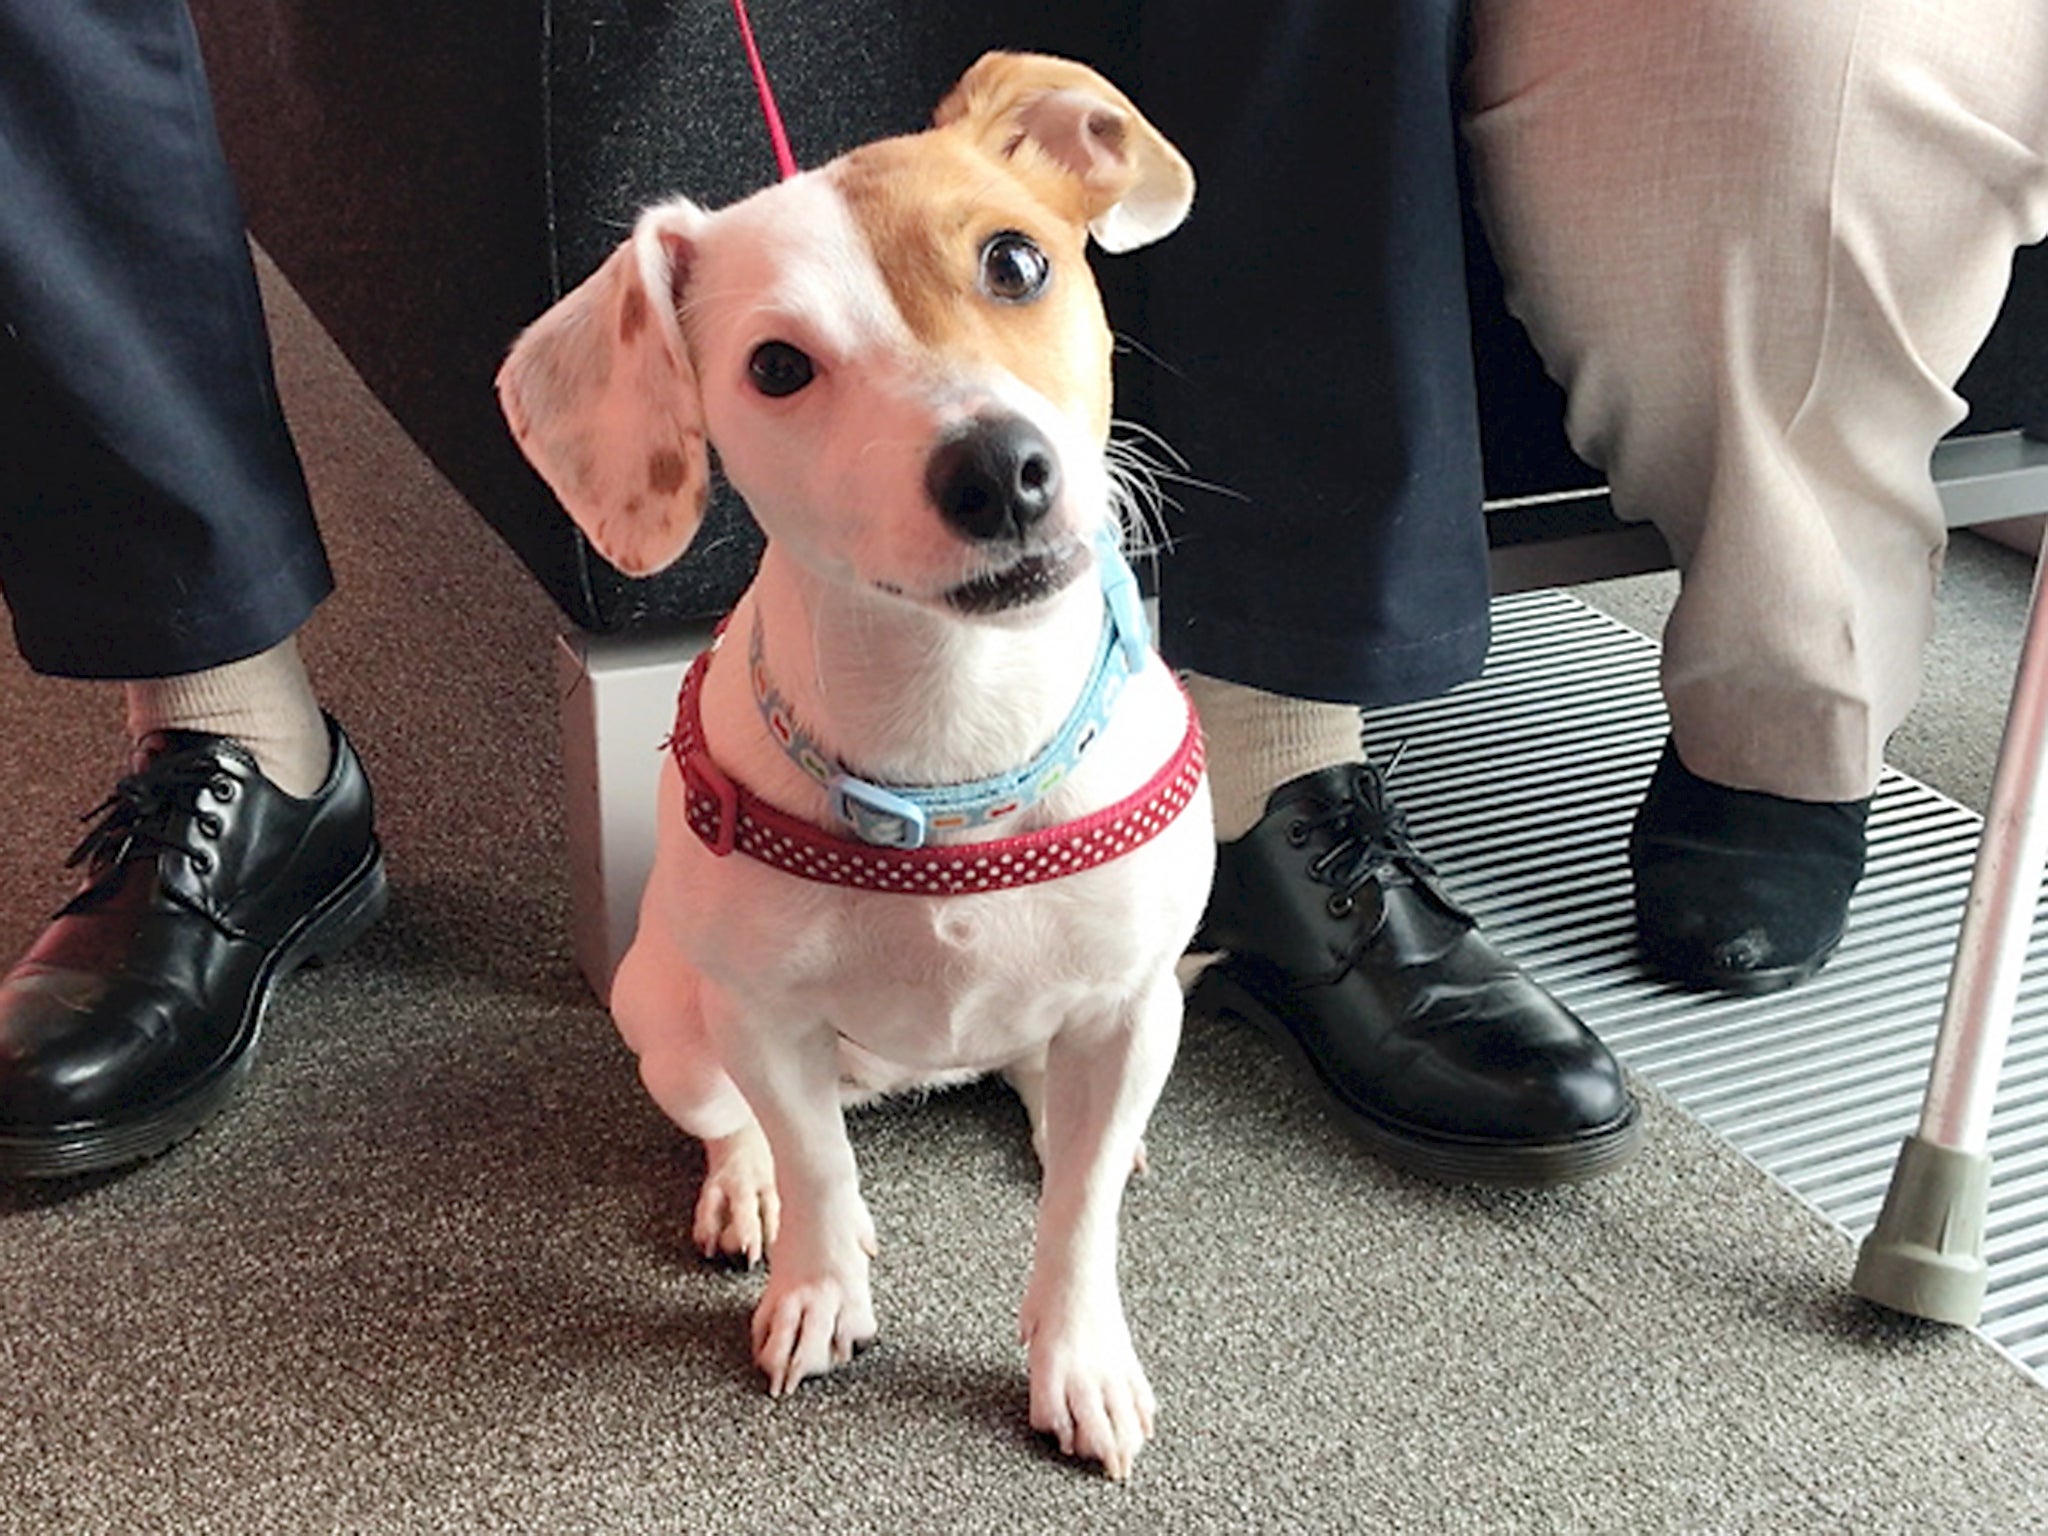 Molly, a Jack Russell born with male and female parts who has made a complete recovery after undergoing rare gender reassignment surgery